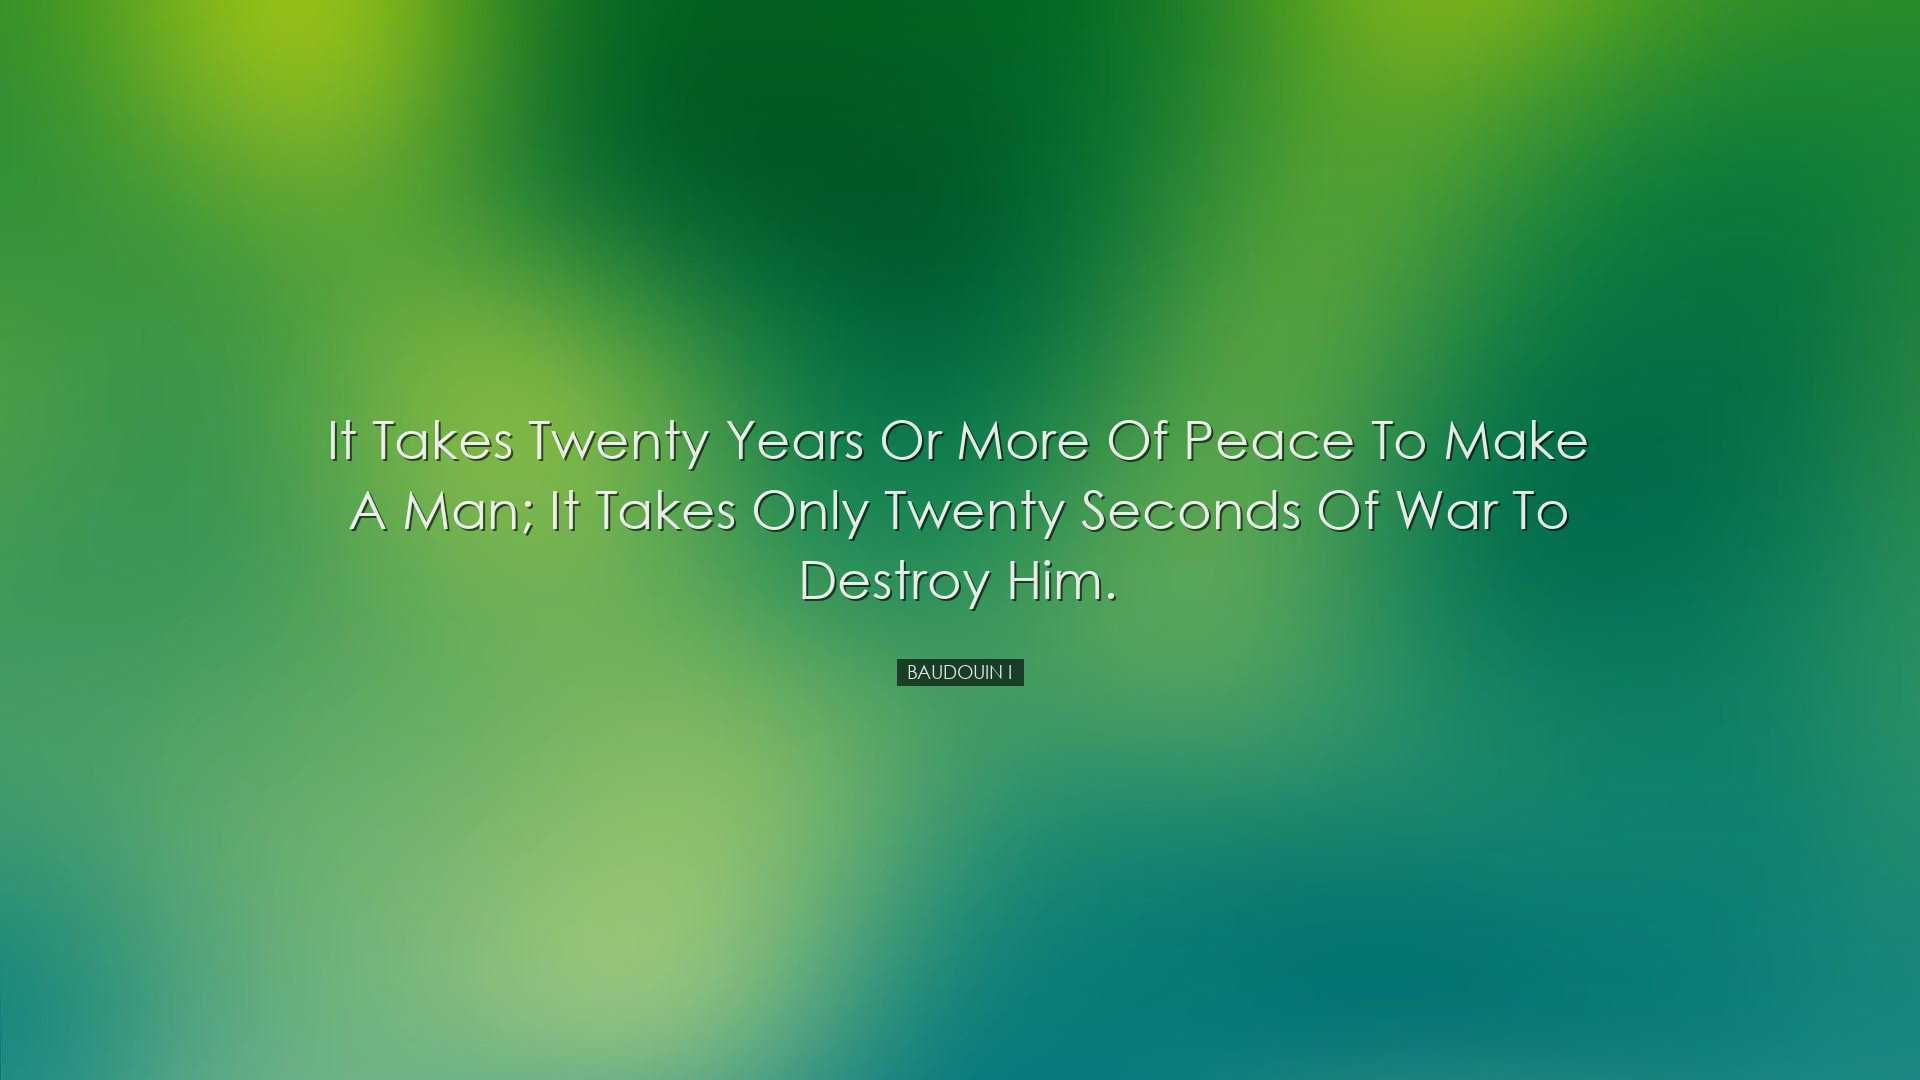 It takes twenty years or more of peace to make a man; it takes onl